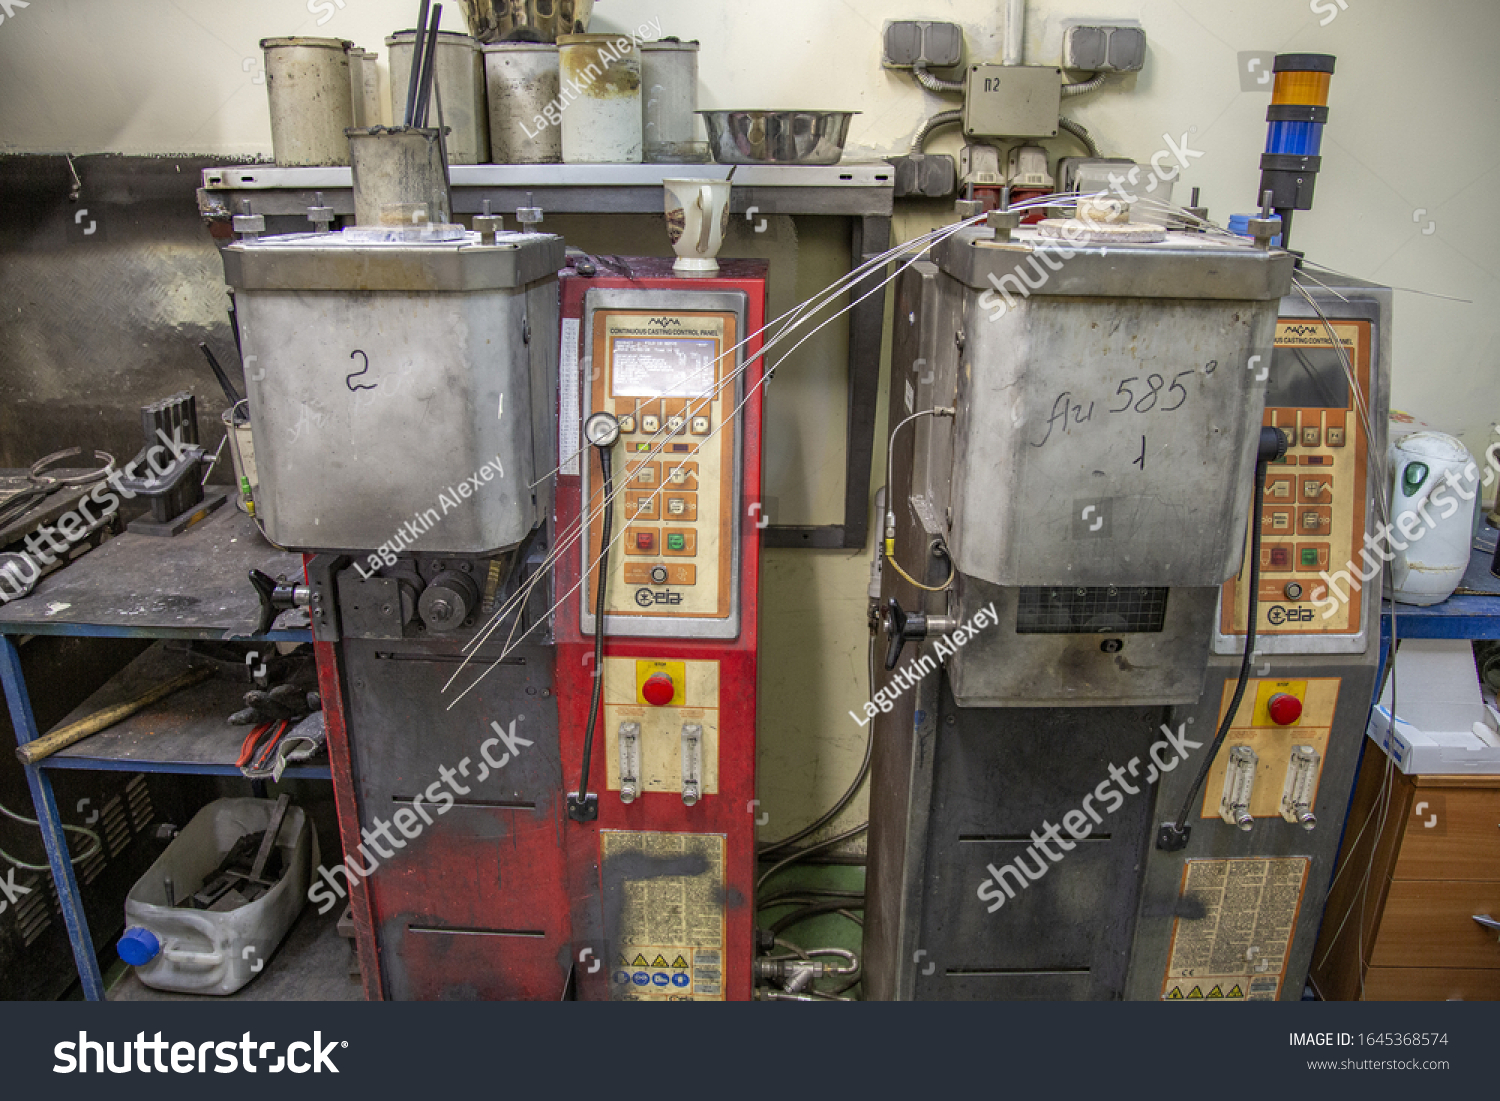 stock-photo-moscow-russia-february-industrial-workshop-of-the-watch-factory-nika-manufacture-of-1645368574.jpg